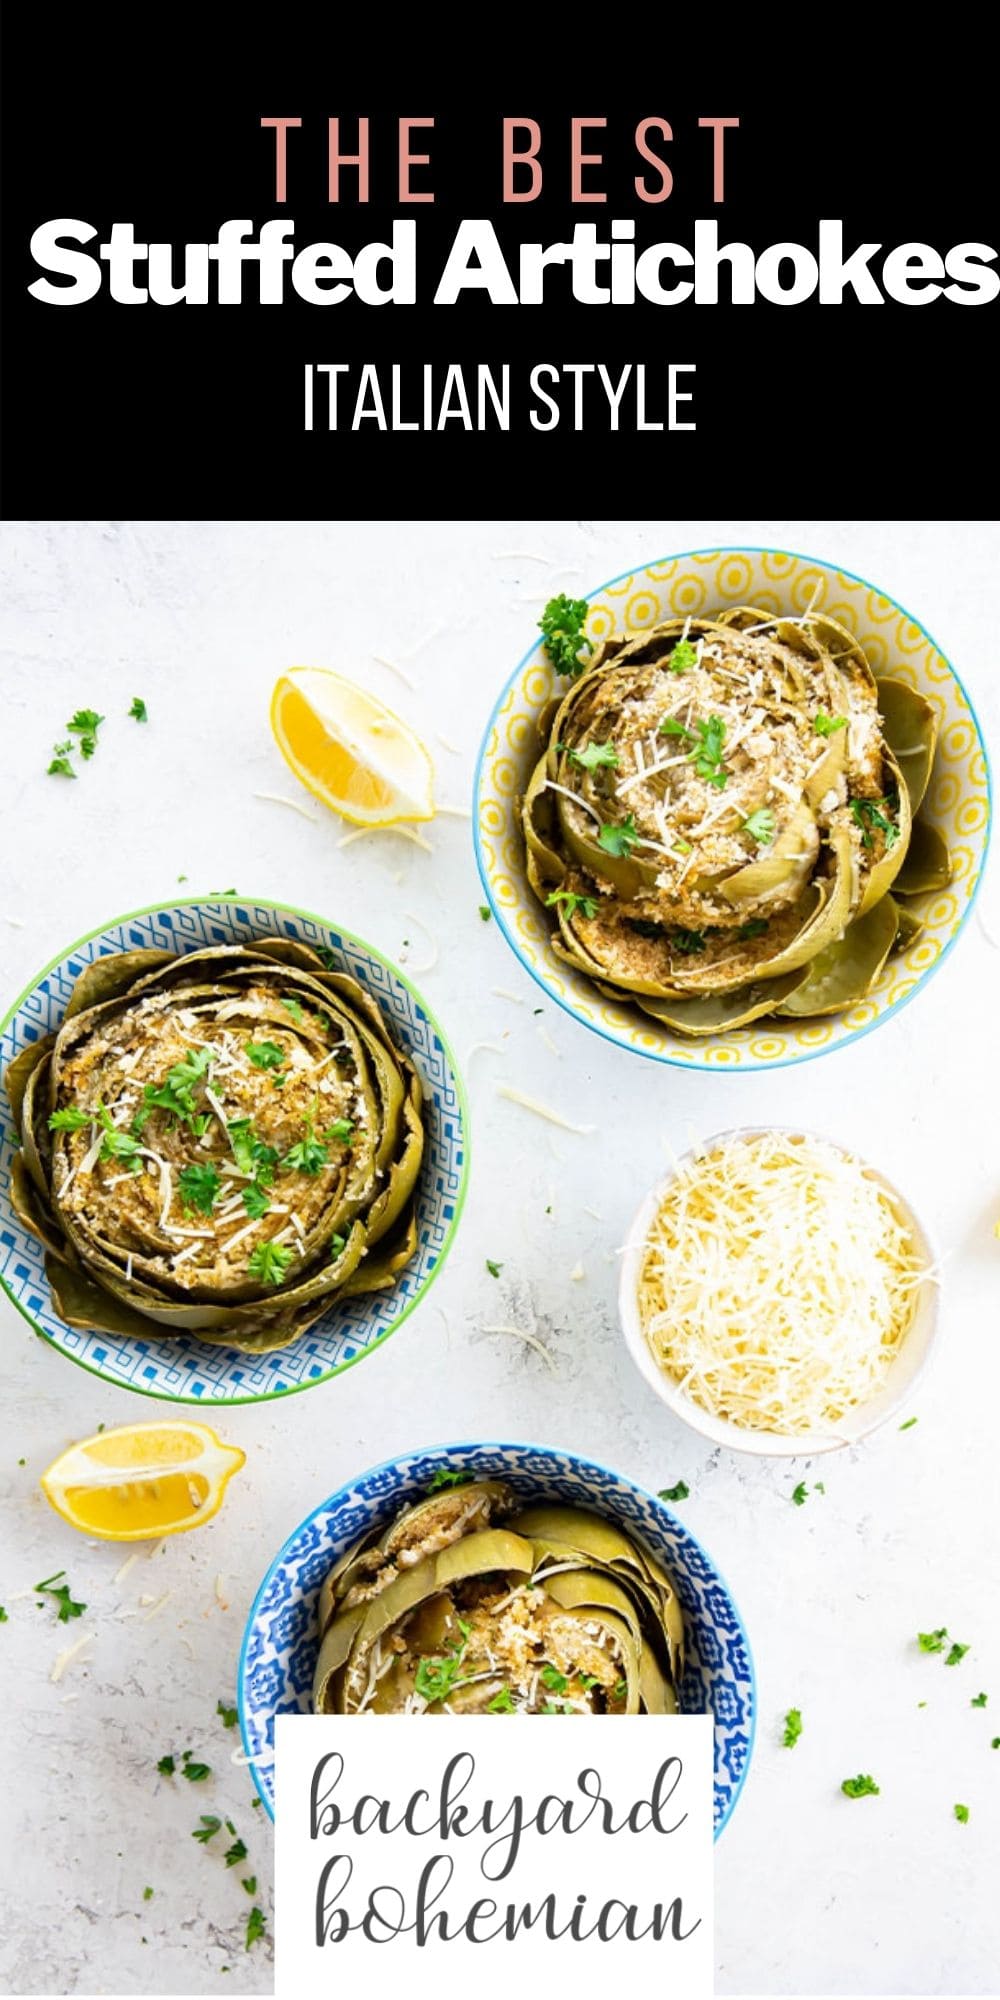 Italian stuffed artichokes are made with simple, healthy ingredients and are ready in under 1 hour. These stuffed artichokes can be made on the stovetop or the Instant Pot! via @foodhussy